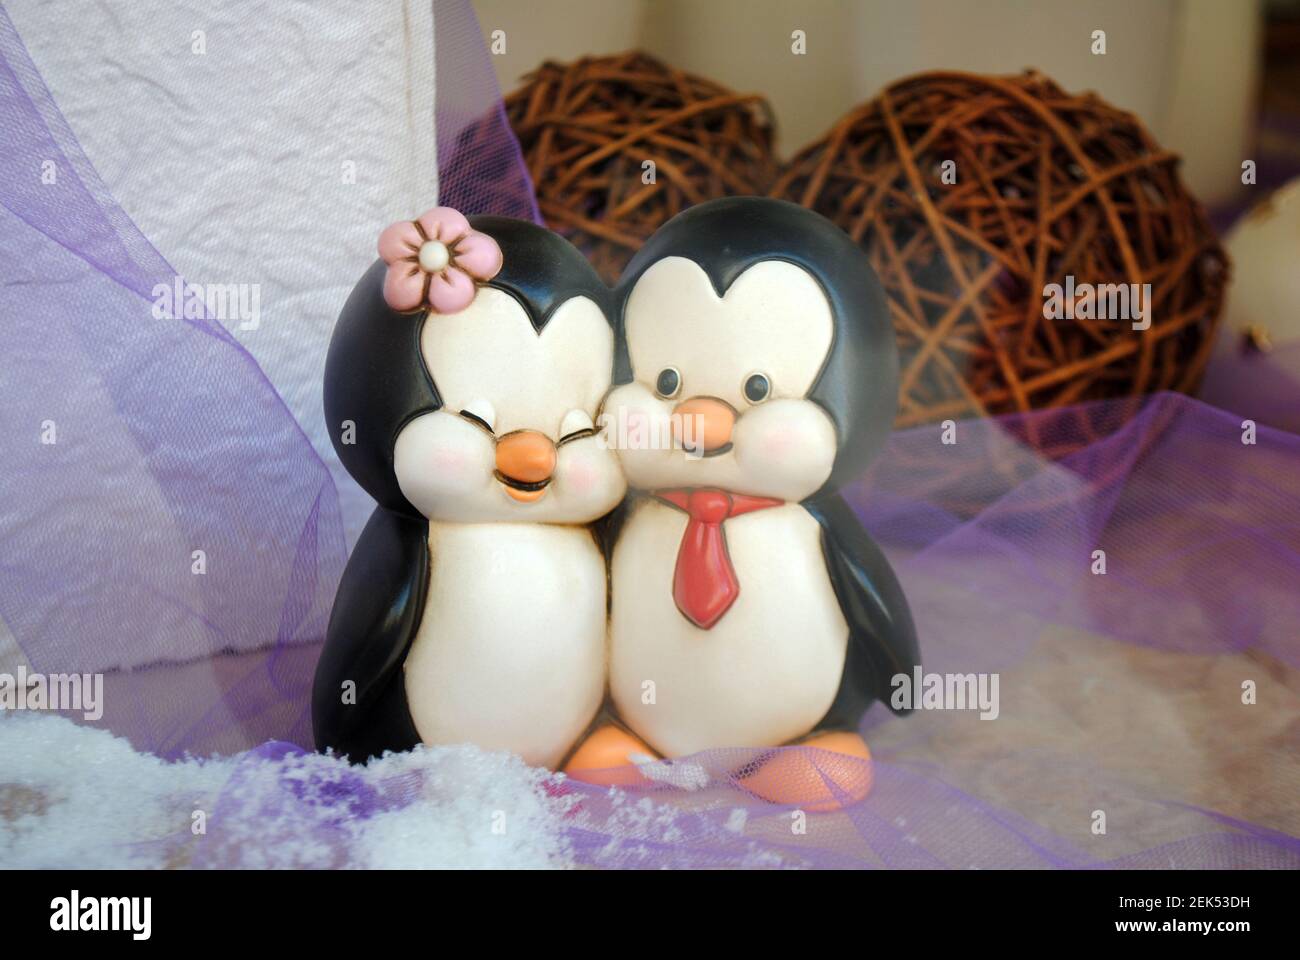 A penguin couple statuette depicting the feeling of love. Stock Photo